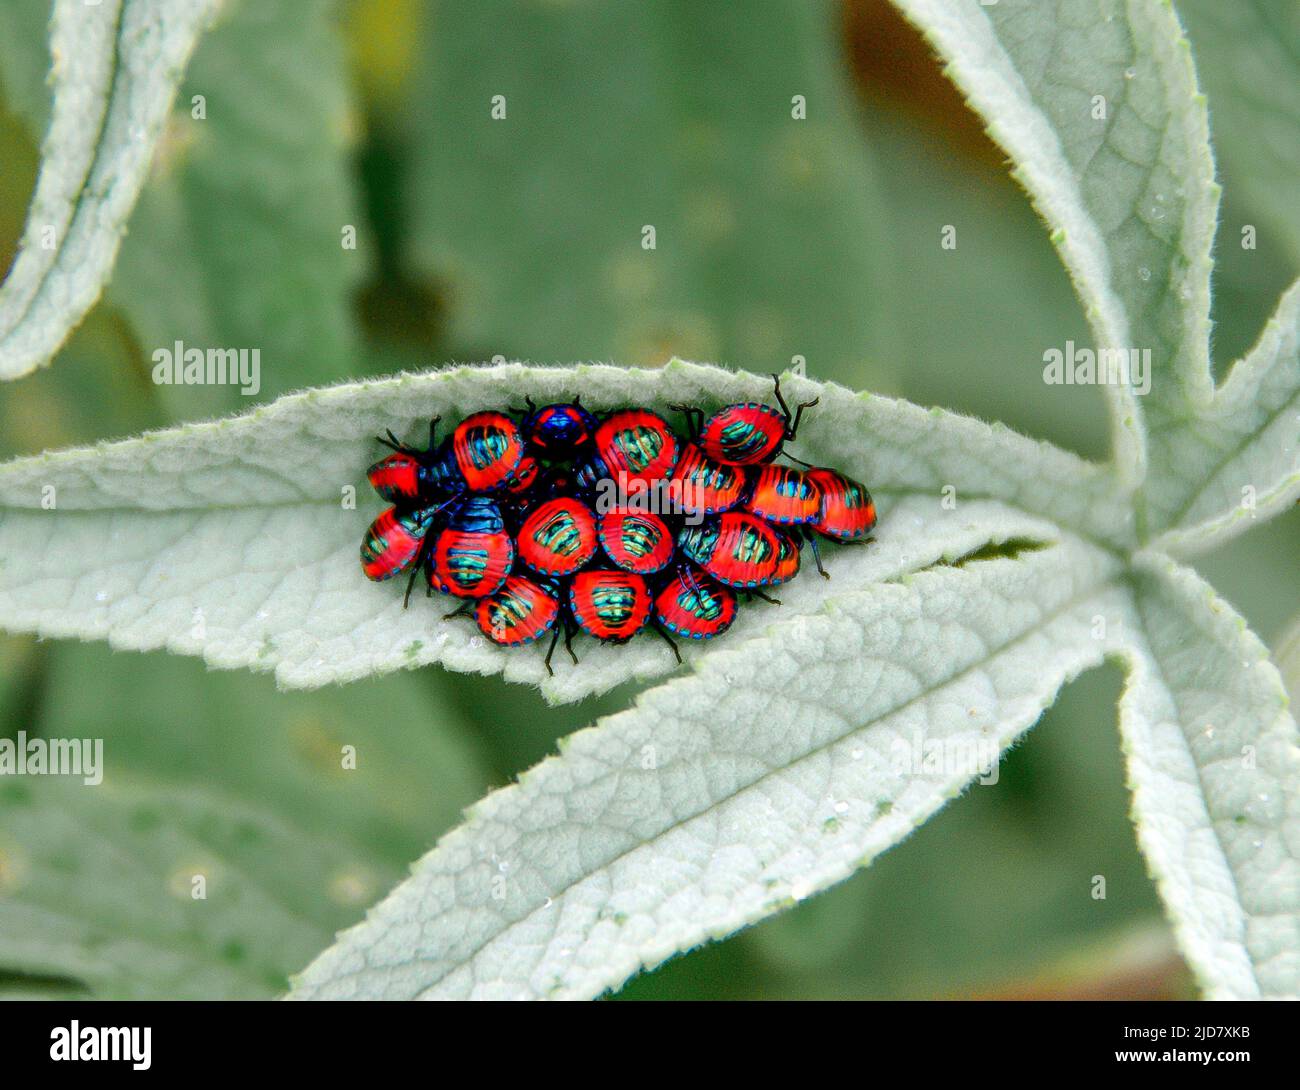 Cluster of bright red and blue Hibiscus Harlequin Bug nymphs (Tectocoris diophthalmus) on leaf of Cottonwood tree, Hibiscus tiliaceus, QLD, Australia Stock Photo